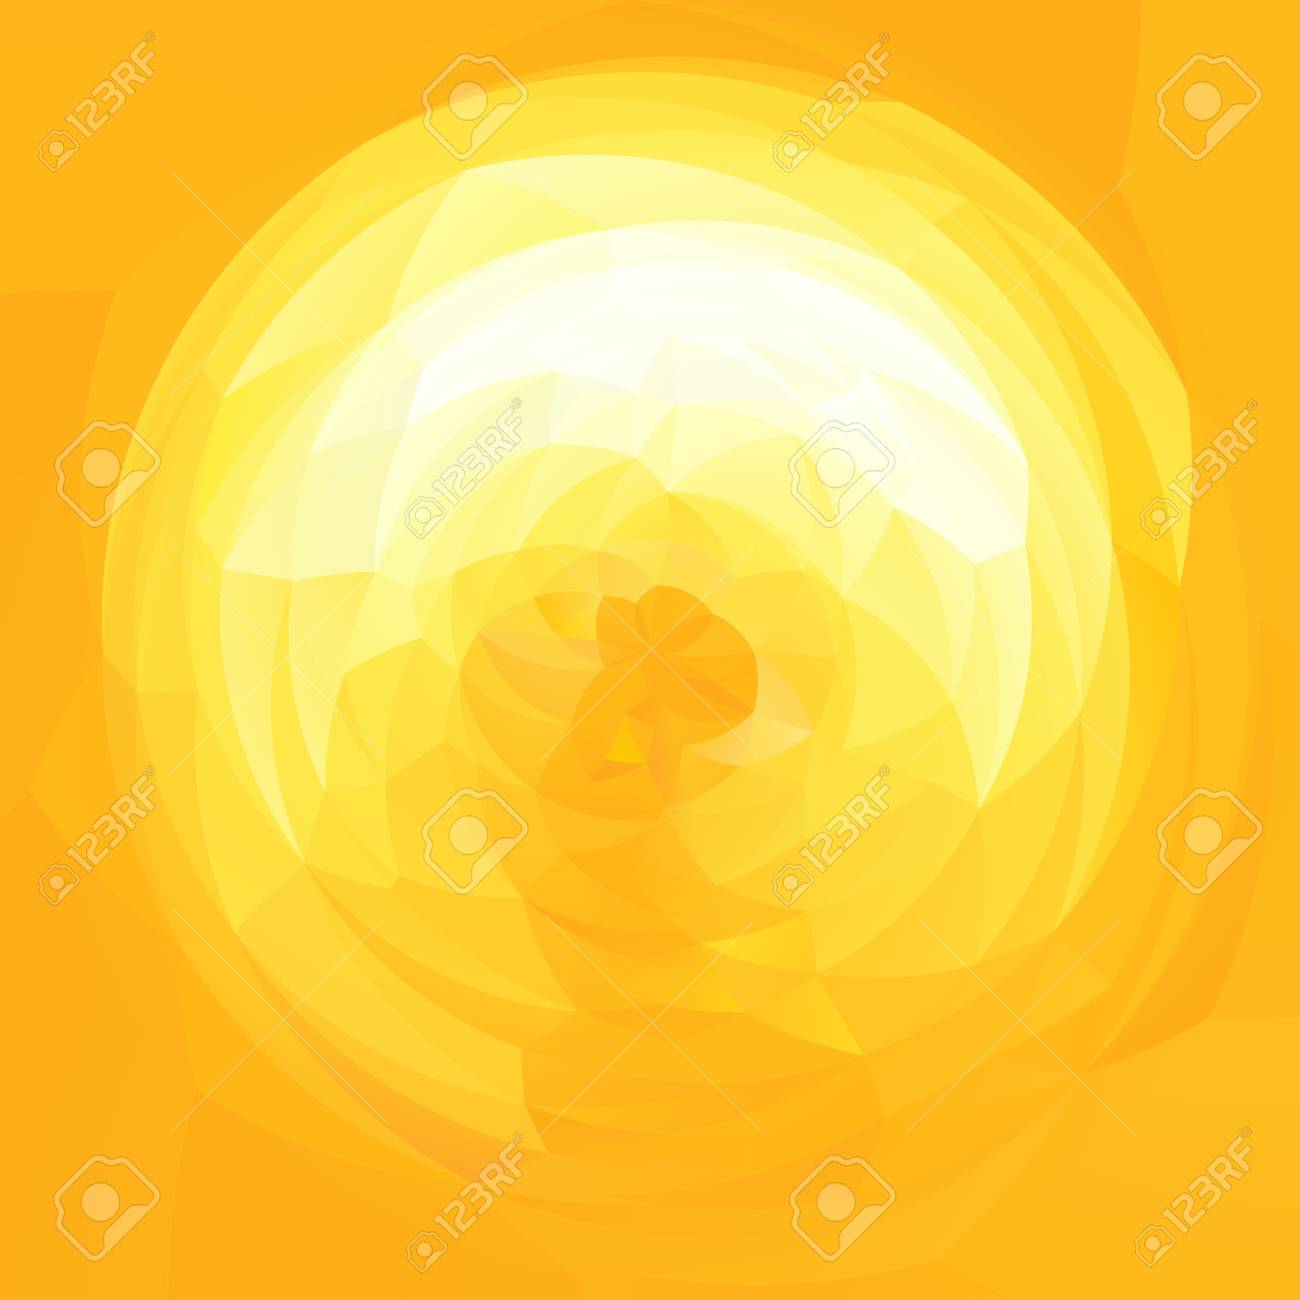 Abstract Modern Artistic Rounded Shapes Background Sunshine